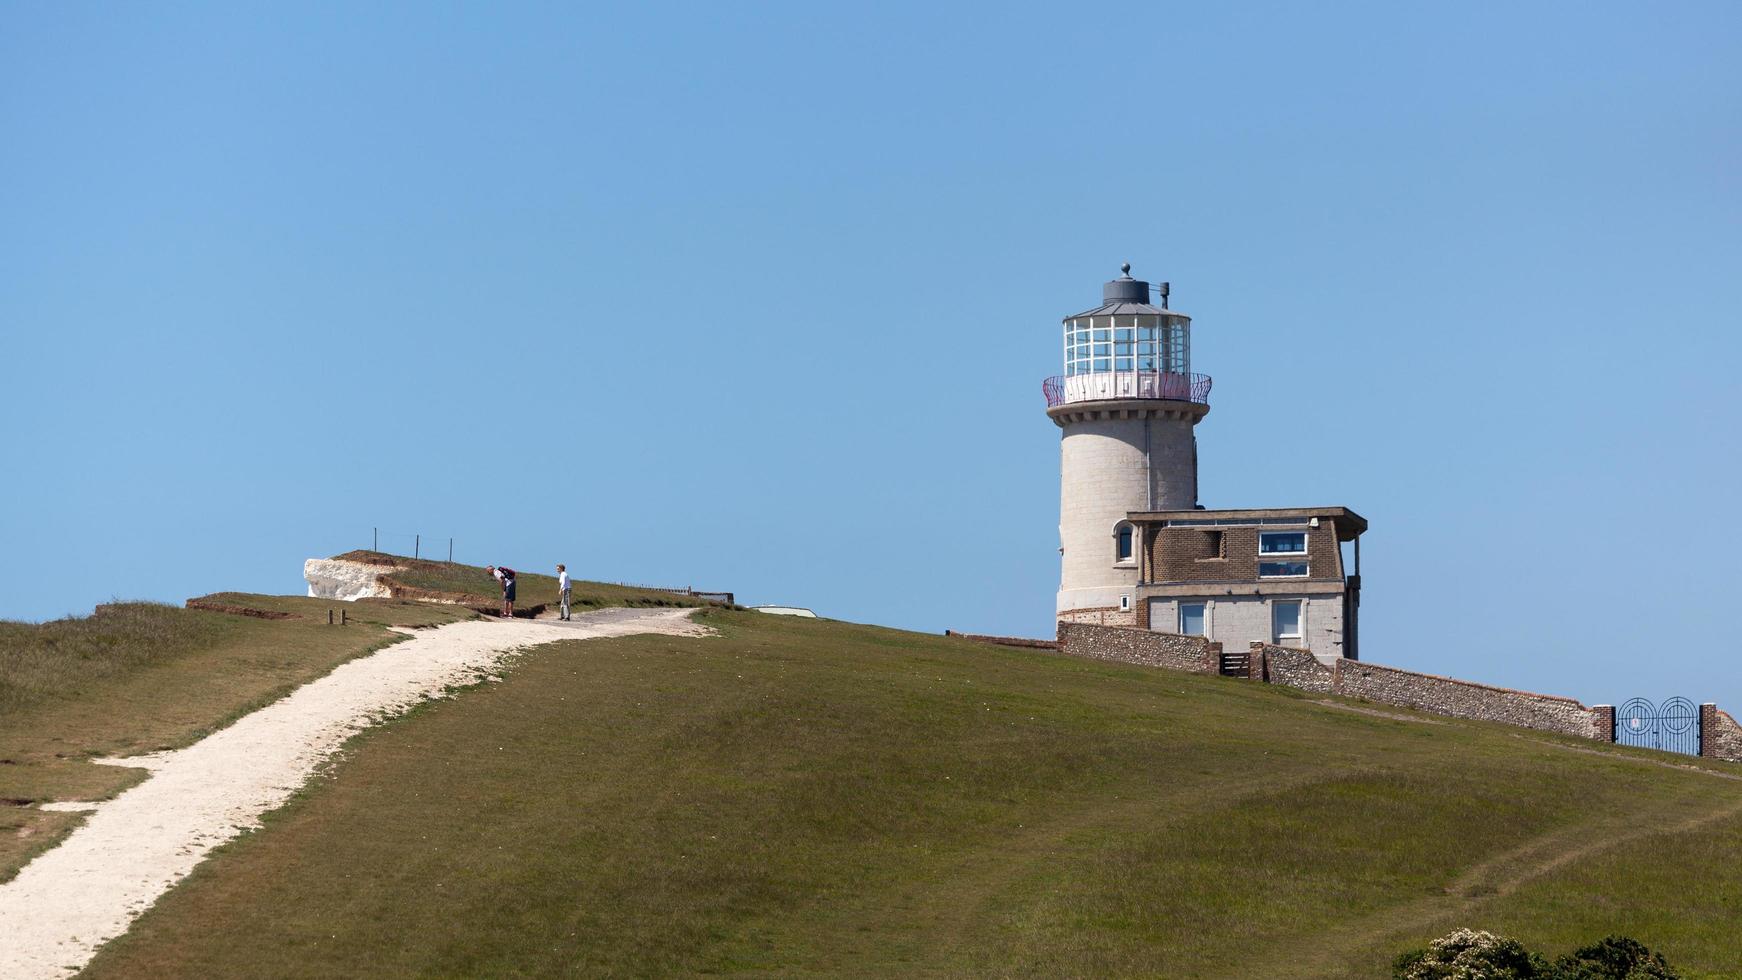 The Belle Toute Lighthouse at Beachy Head in Sussex on May 11, 2011. Unidentified people. photo